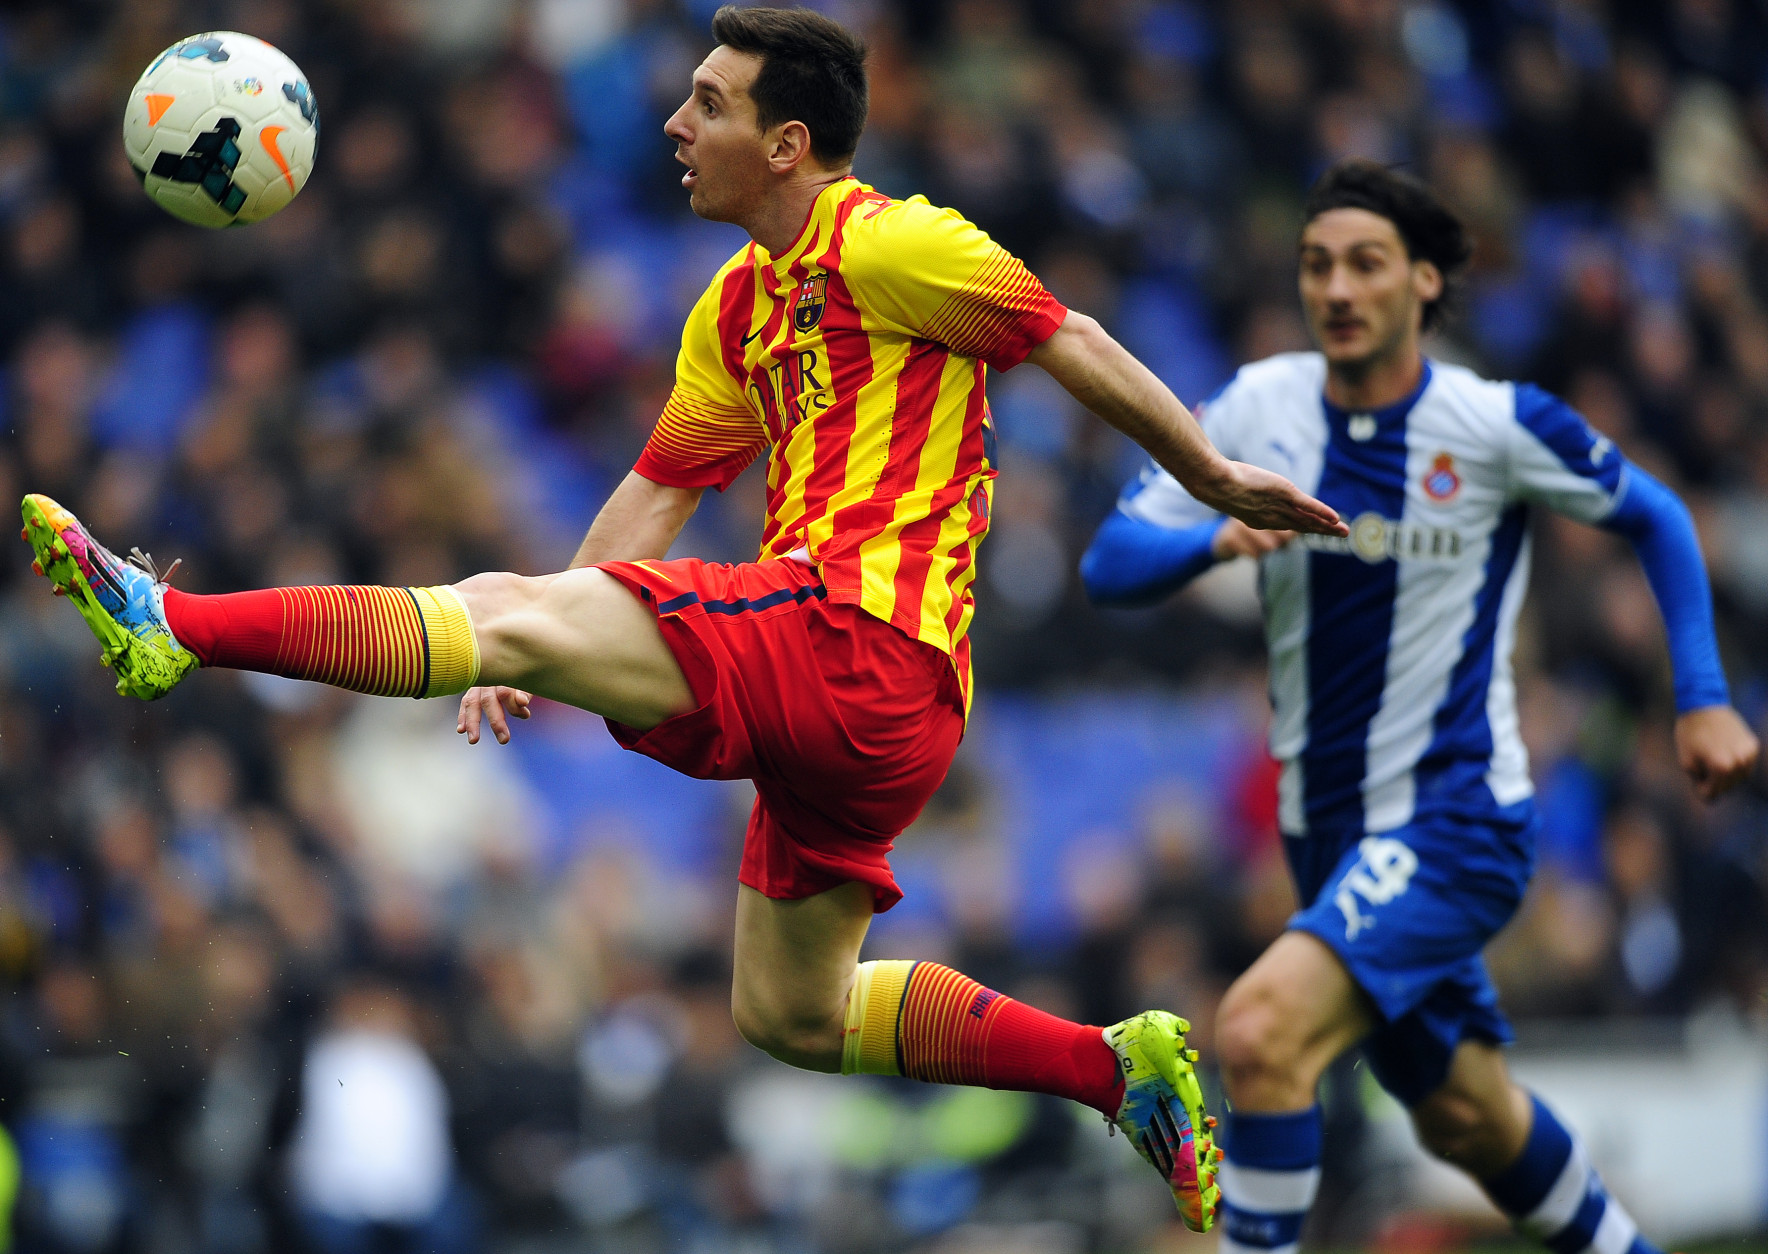 FOR USE AS DESIRED, YEAR END PHOTOS - FILE - FC Barcelona's Lionel Messi, left, duels for the ball against Espanyol's Diego Colotto during a Spanish La Liga soccer match against Espanyol at Cornella-El Prat stadium in Cornella Llobregat, Spain, Saturday, March 29, 2014. (AP Photo/Manu Fernandez, File)